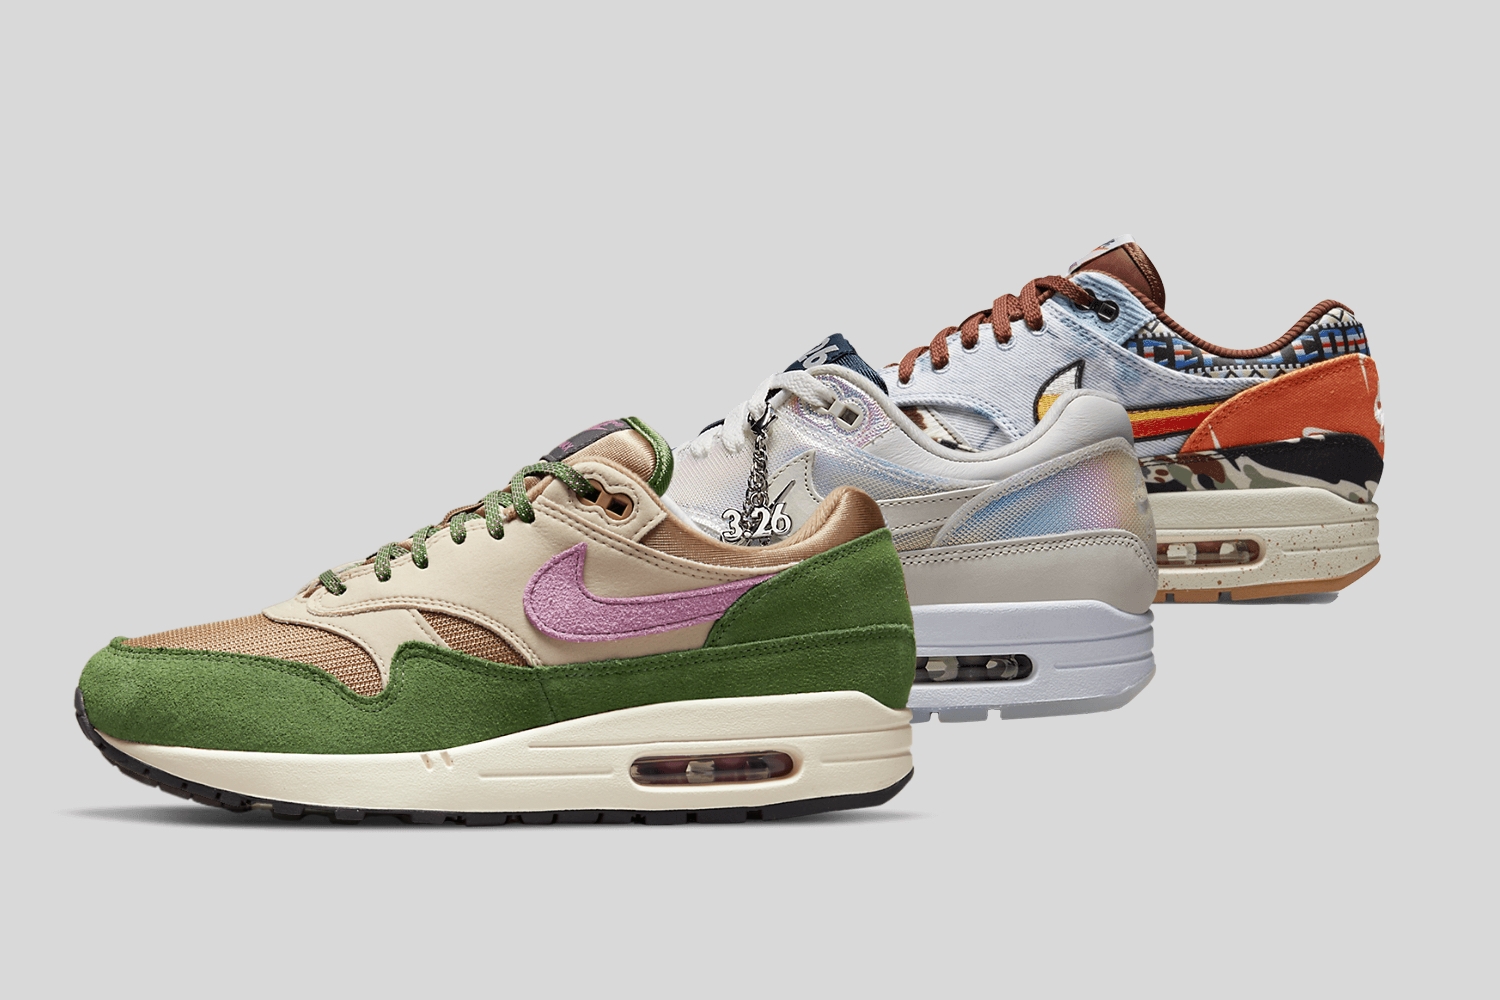 Best selling Nike Air Max 1s currently on StockX